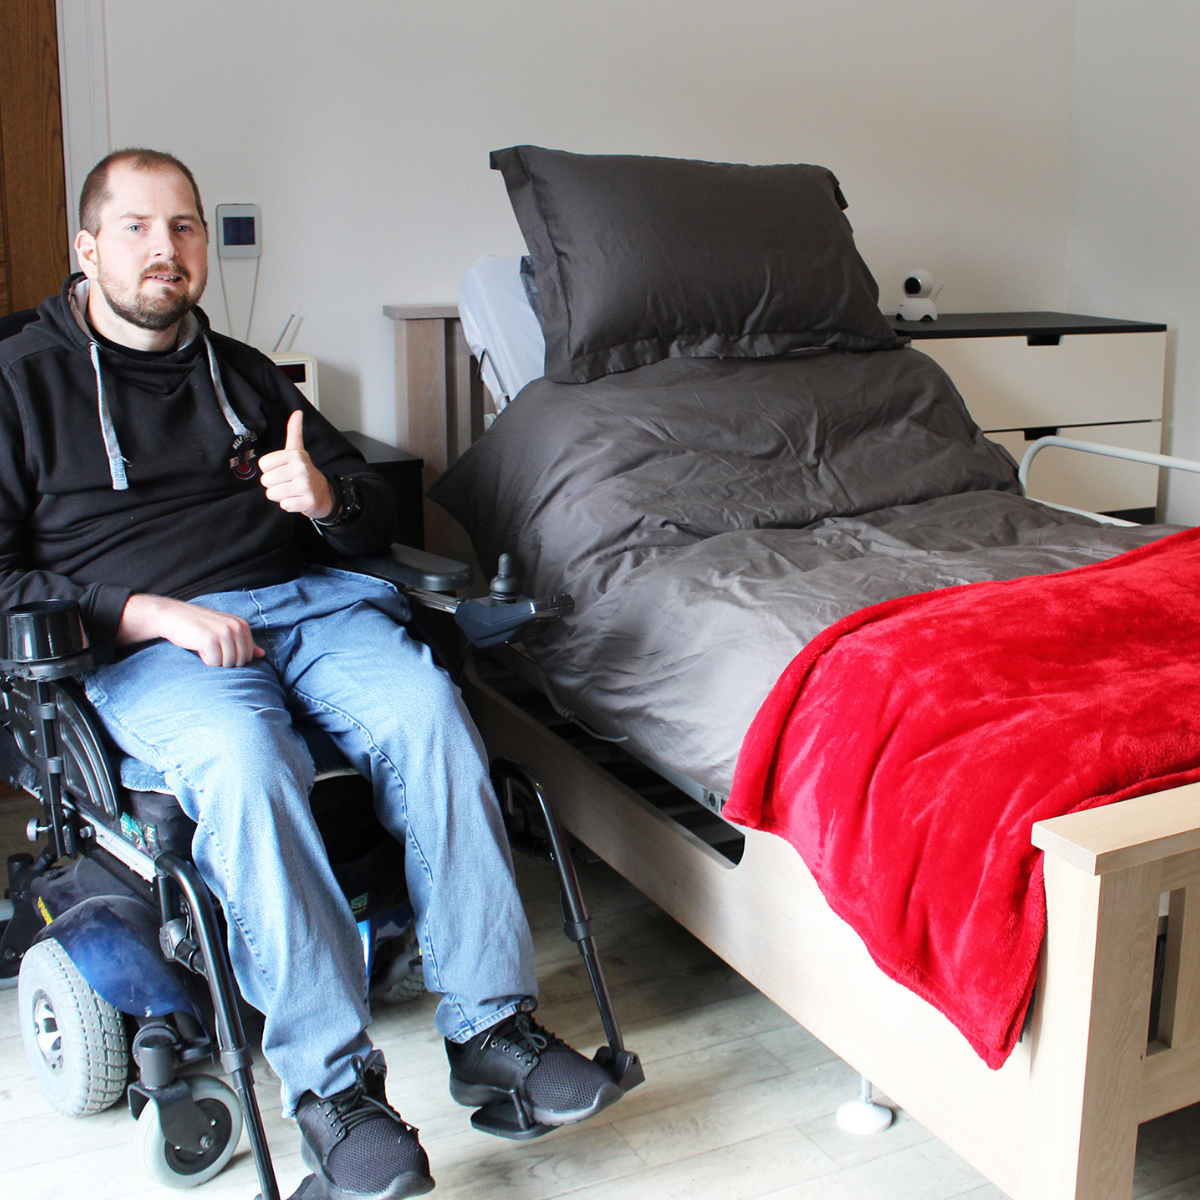 Jon's rotating bed has given him the freedom to return home.